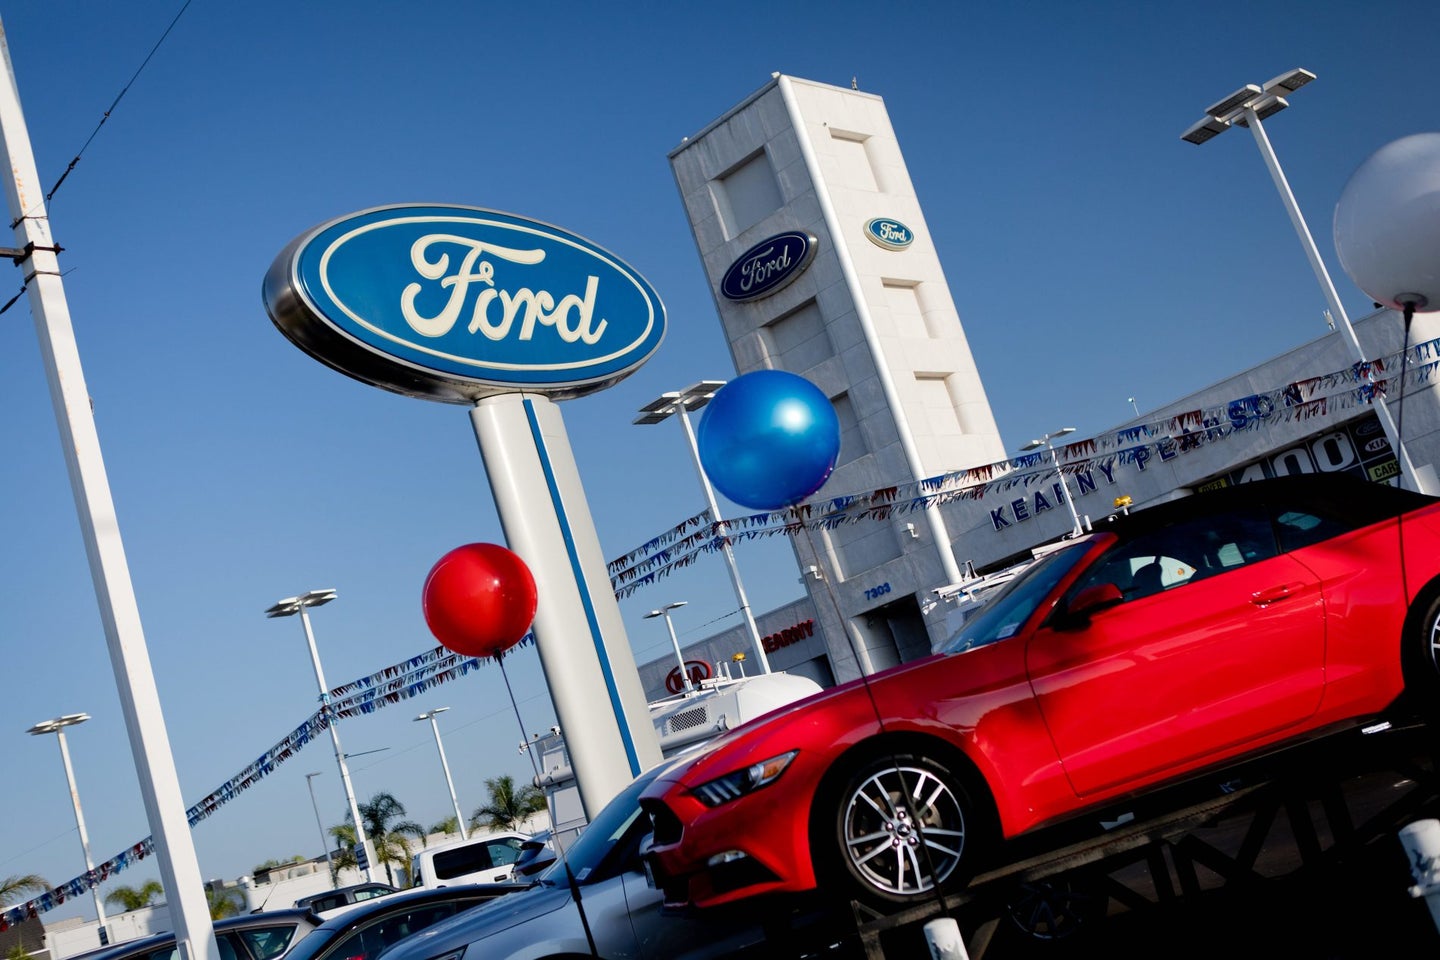 New Car Sales Continuing to Fall, Analysts Say